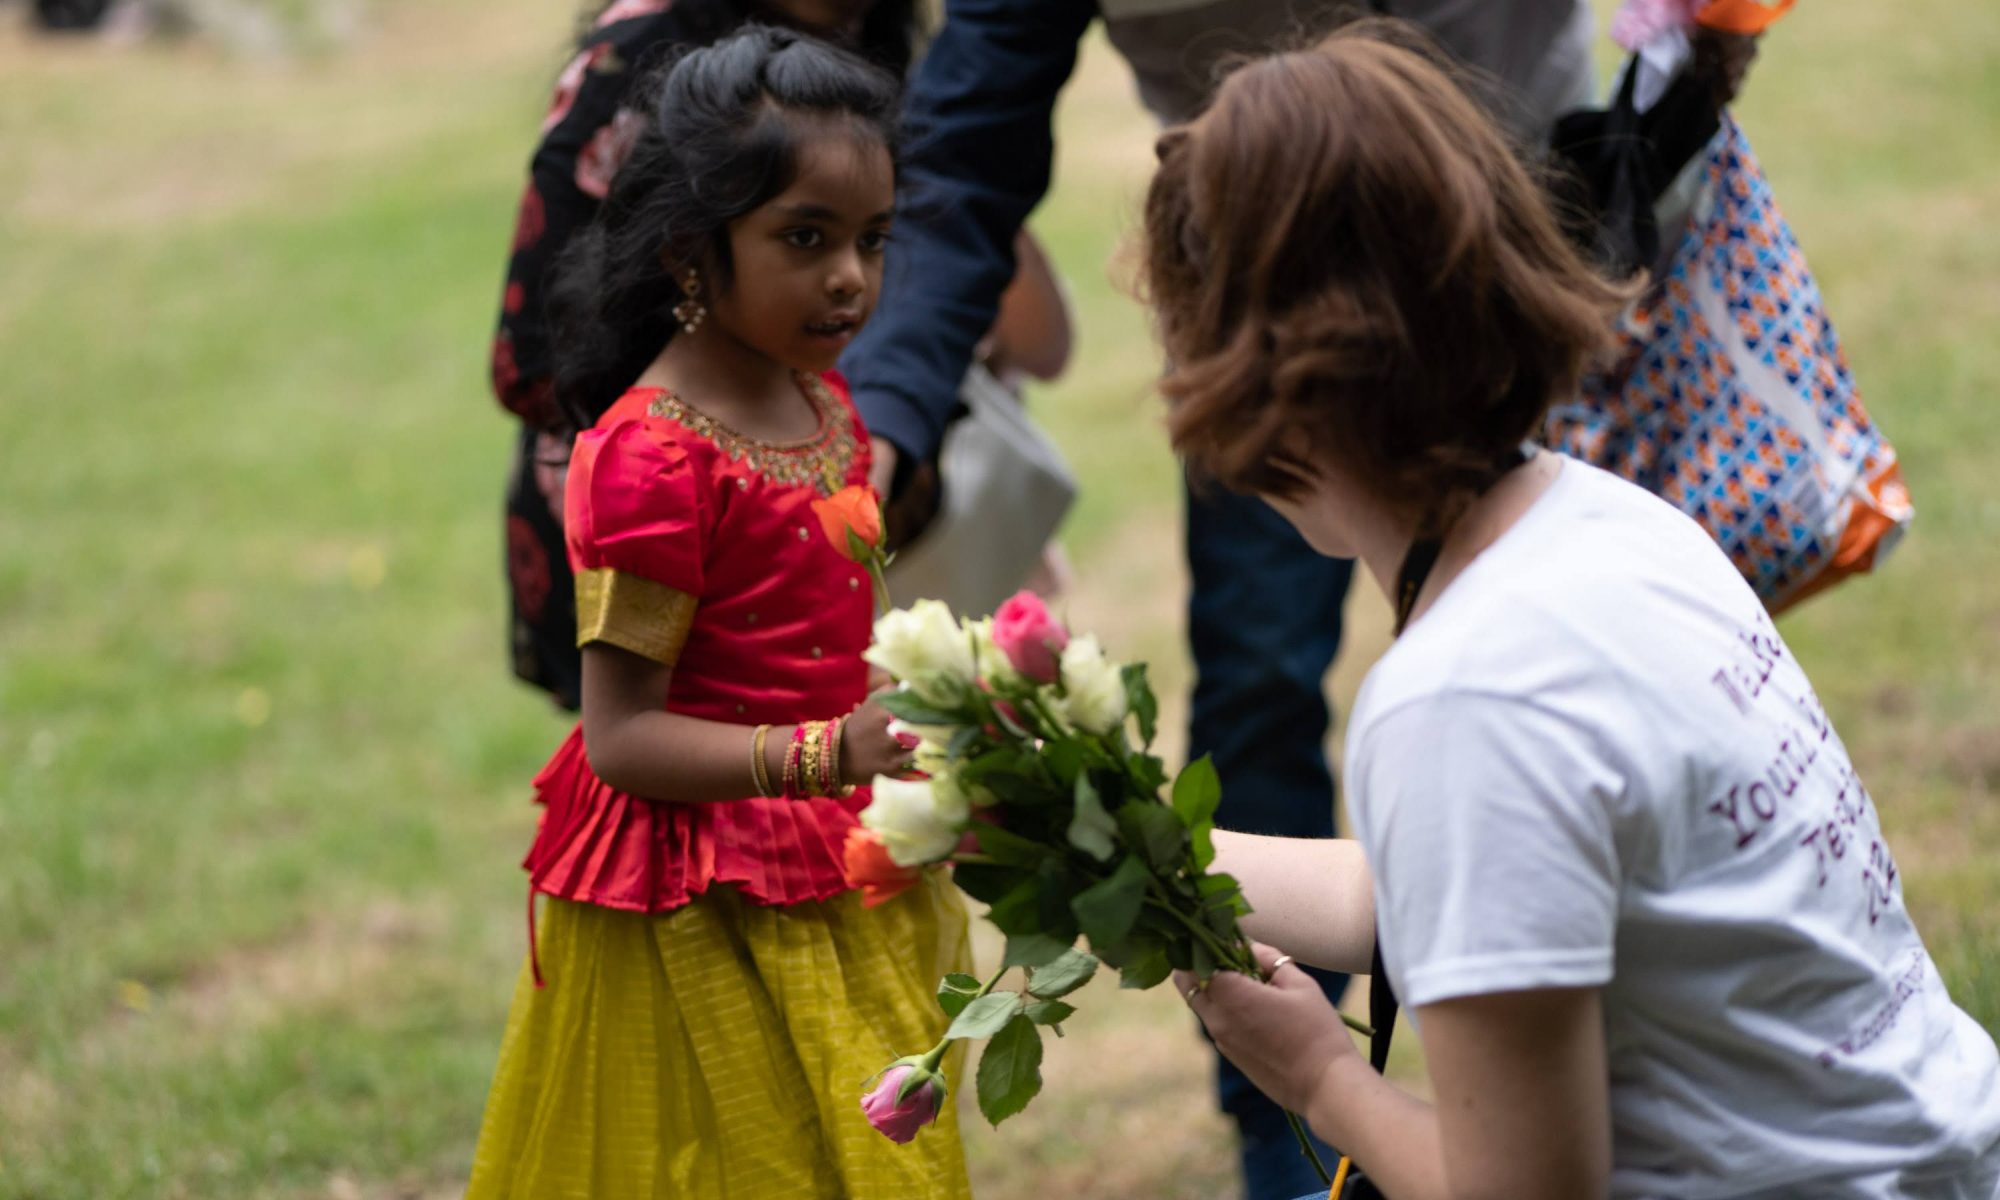 A person kneeling while giving flowers to a young child.